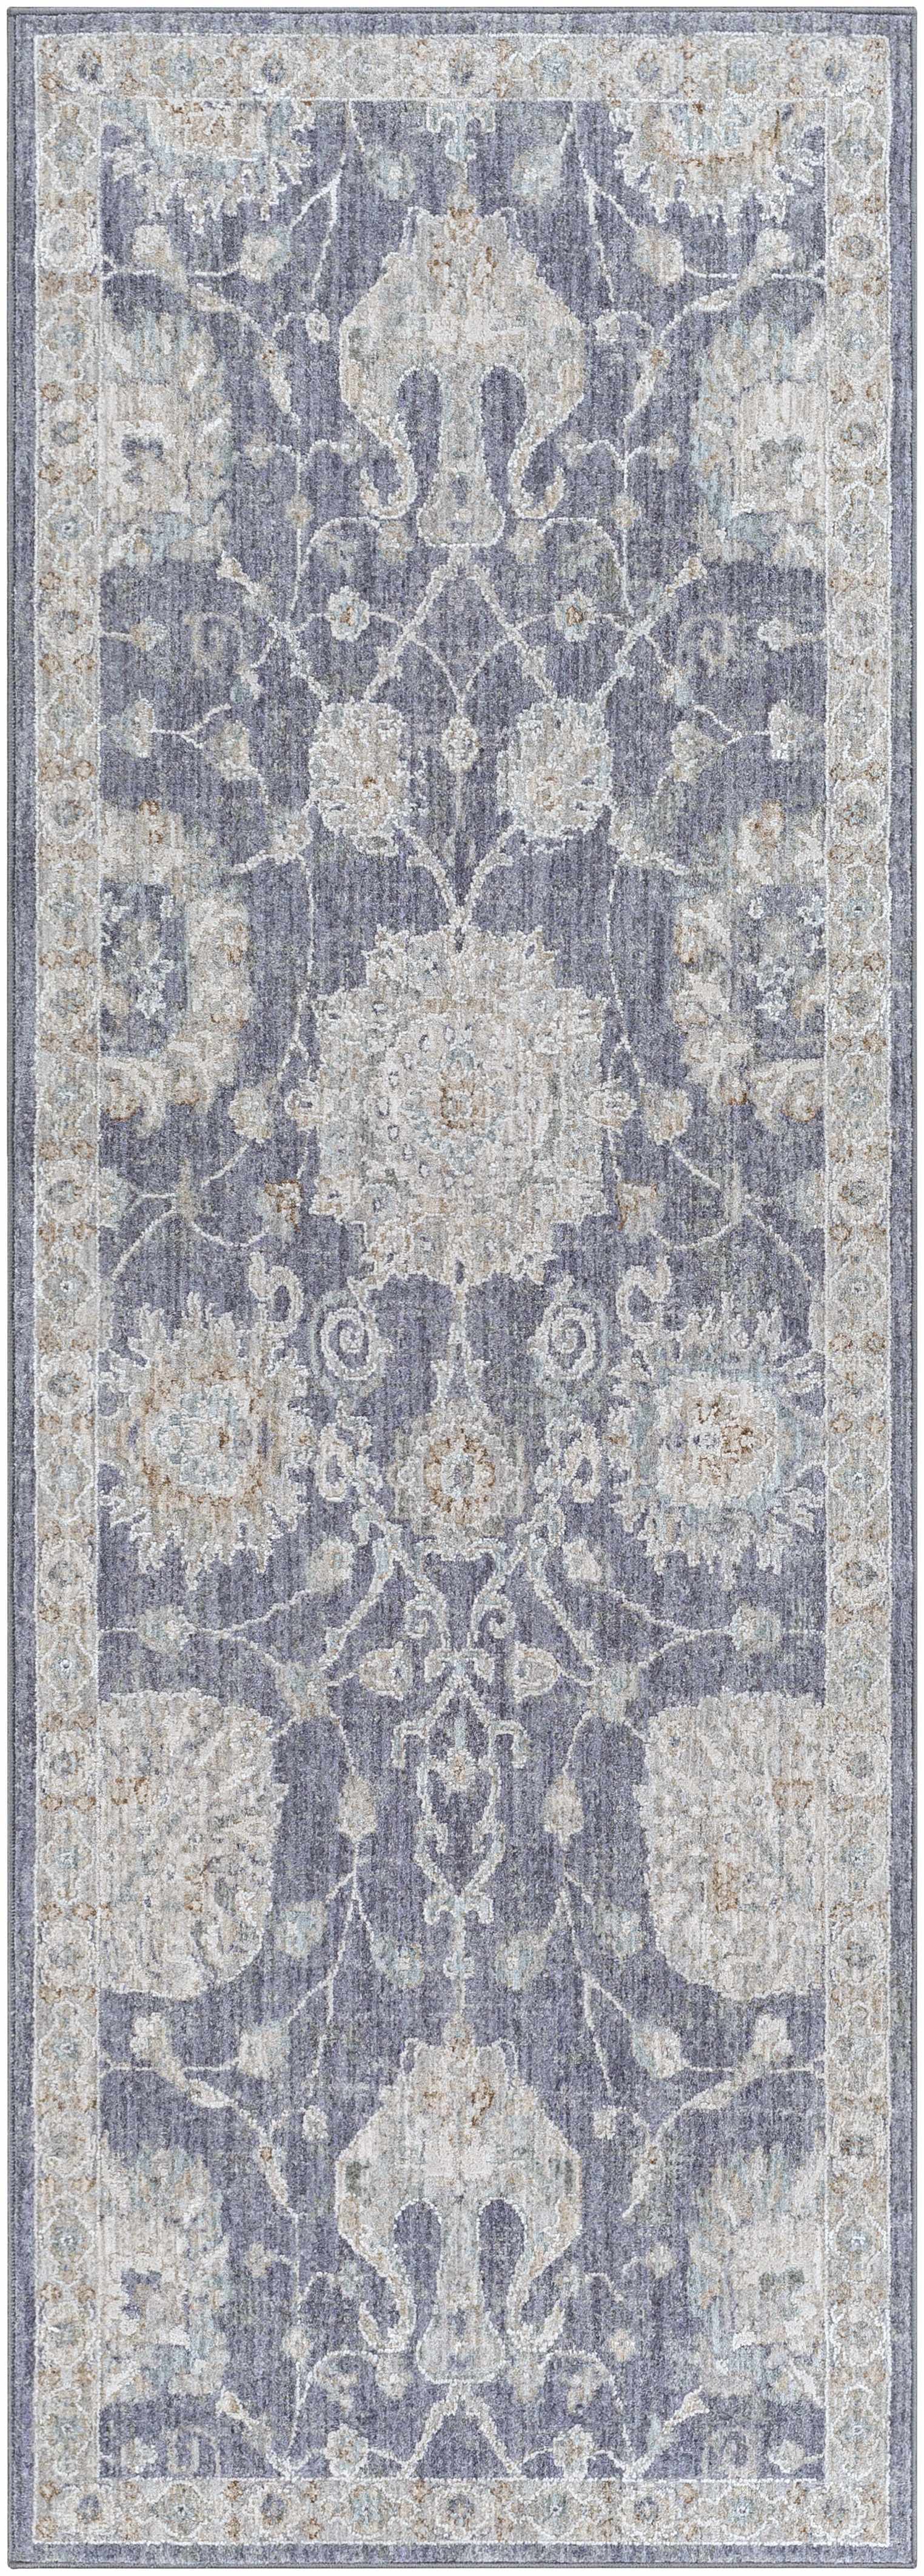 Boutique Rugs Rugs 2'7" x 7'3" Runner Kanimbla Area Rug